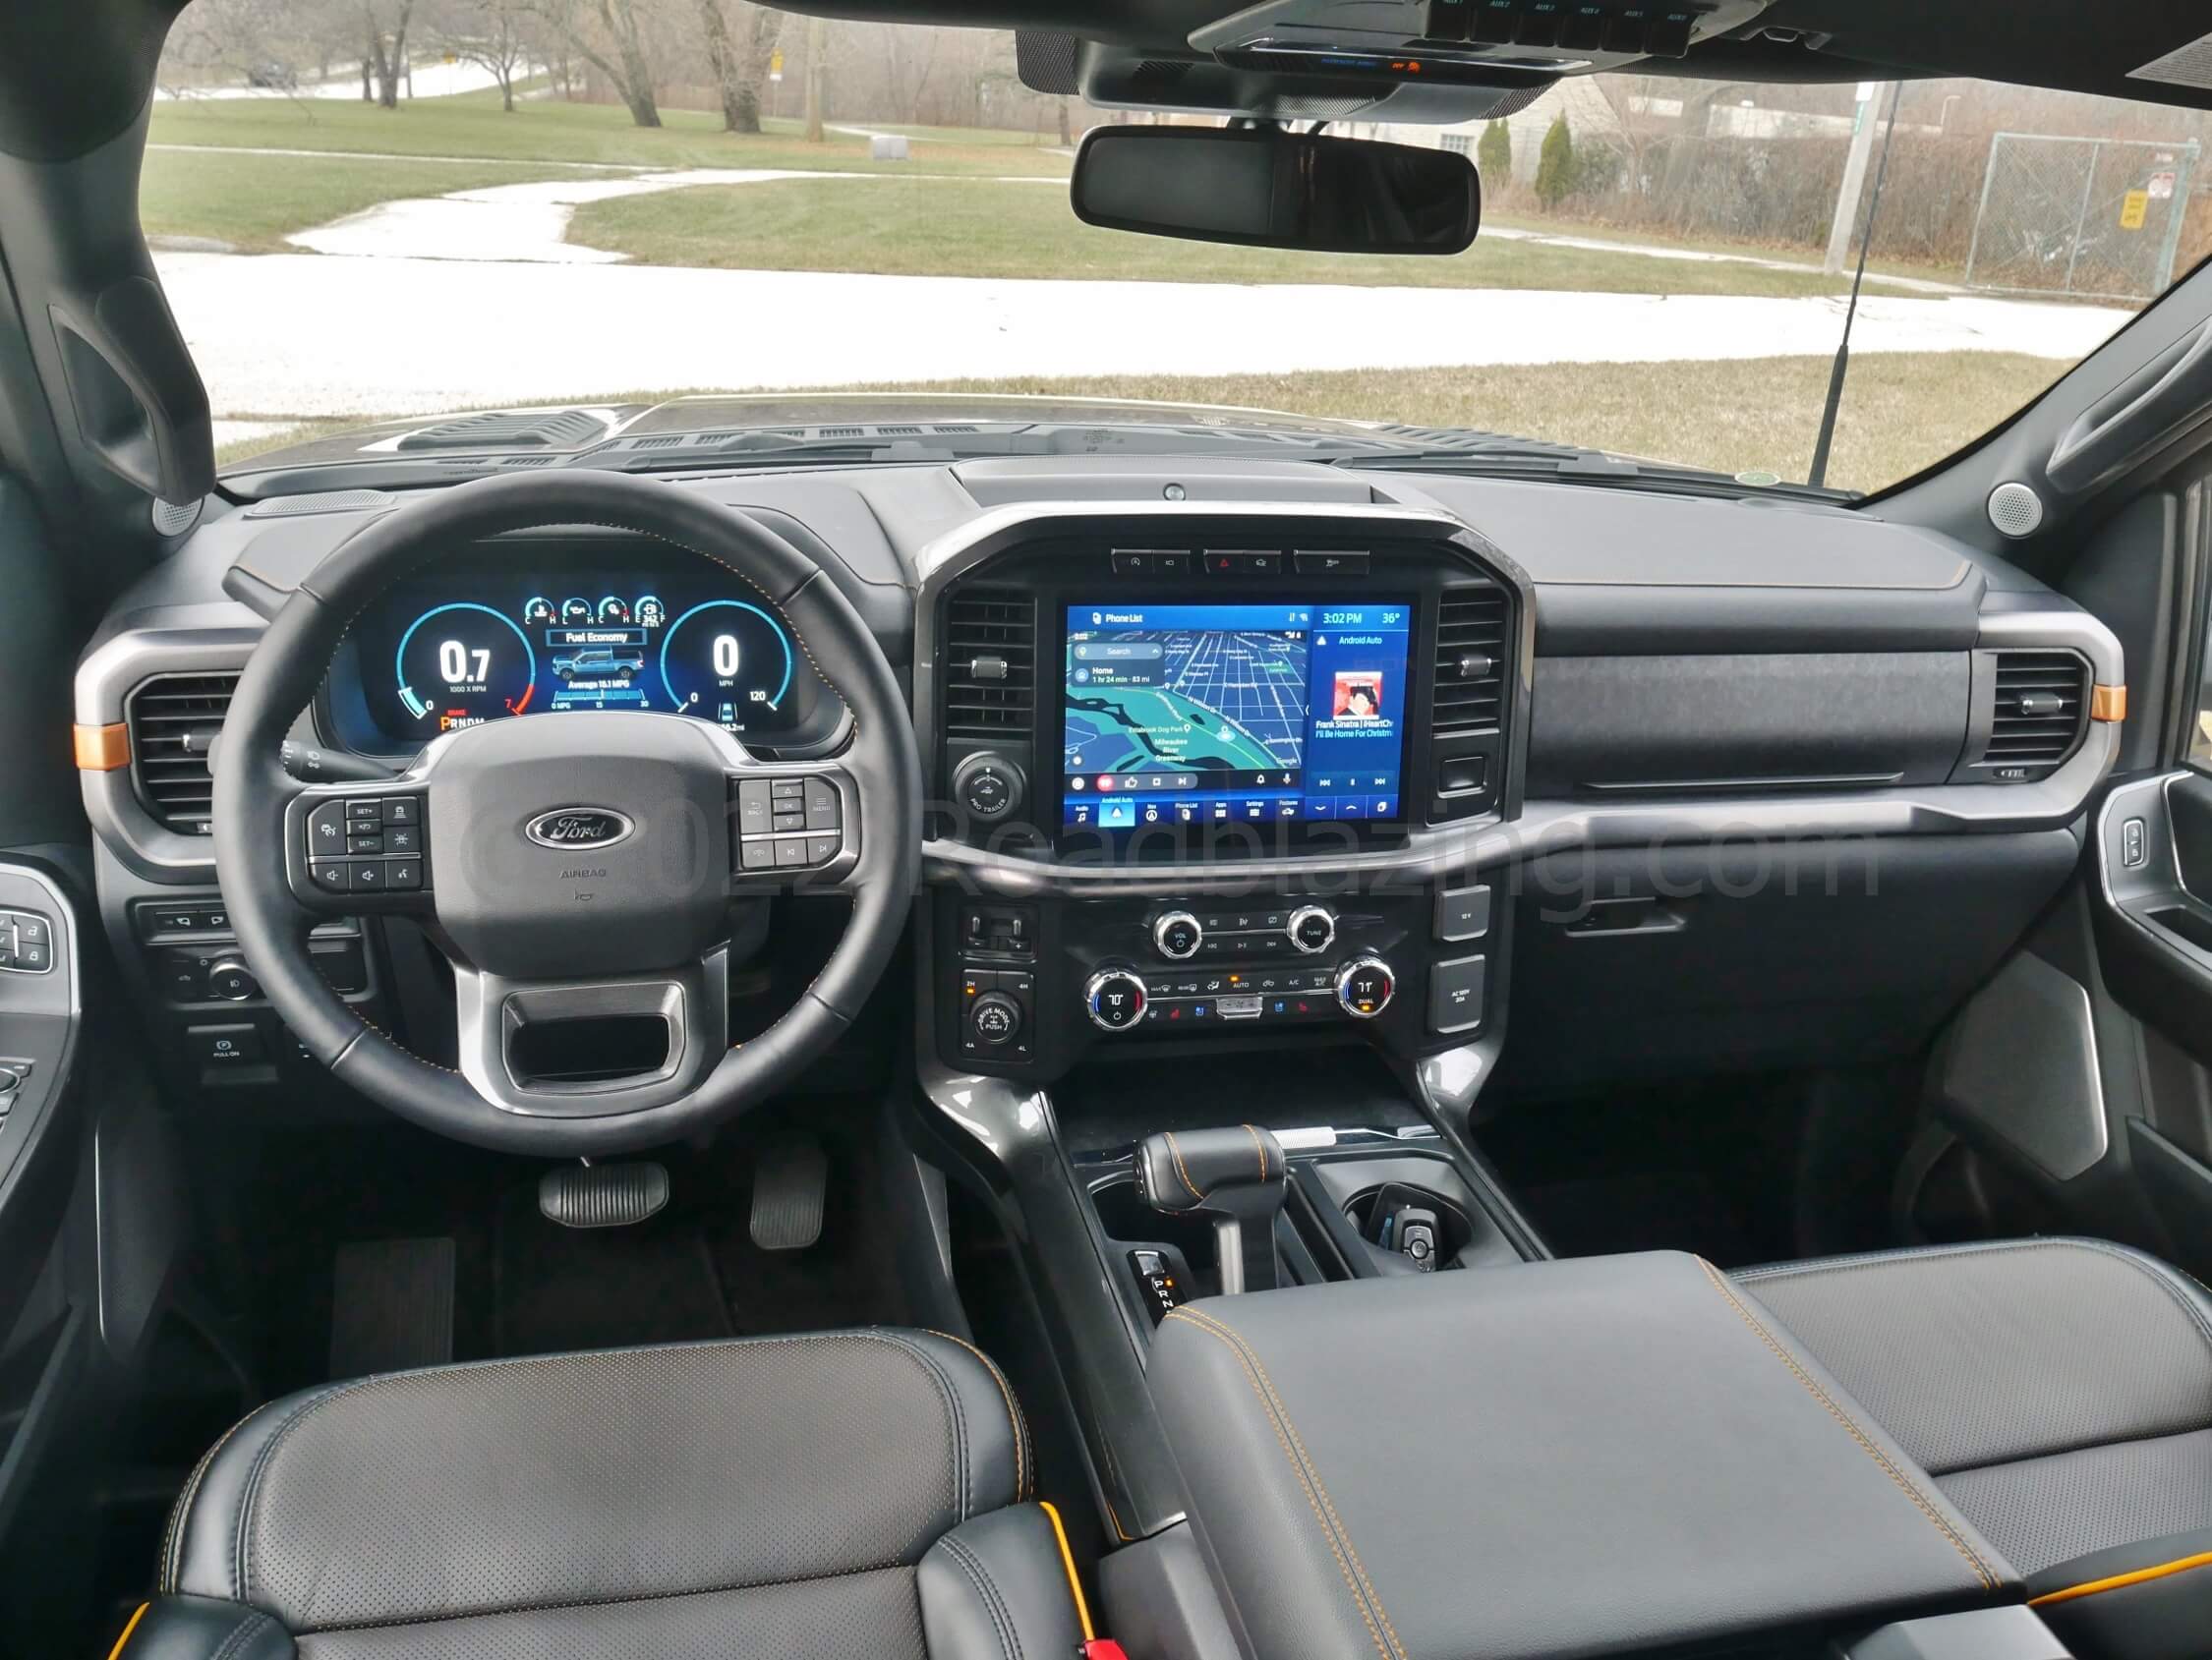 2021 Ford F-150 SuperCrew Tremor 4x4: available extra informative and colorful large displays in the cabin, elegant chrome control bezels if overabundant